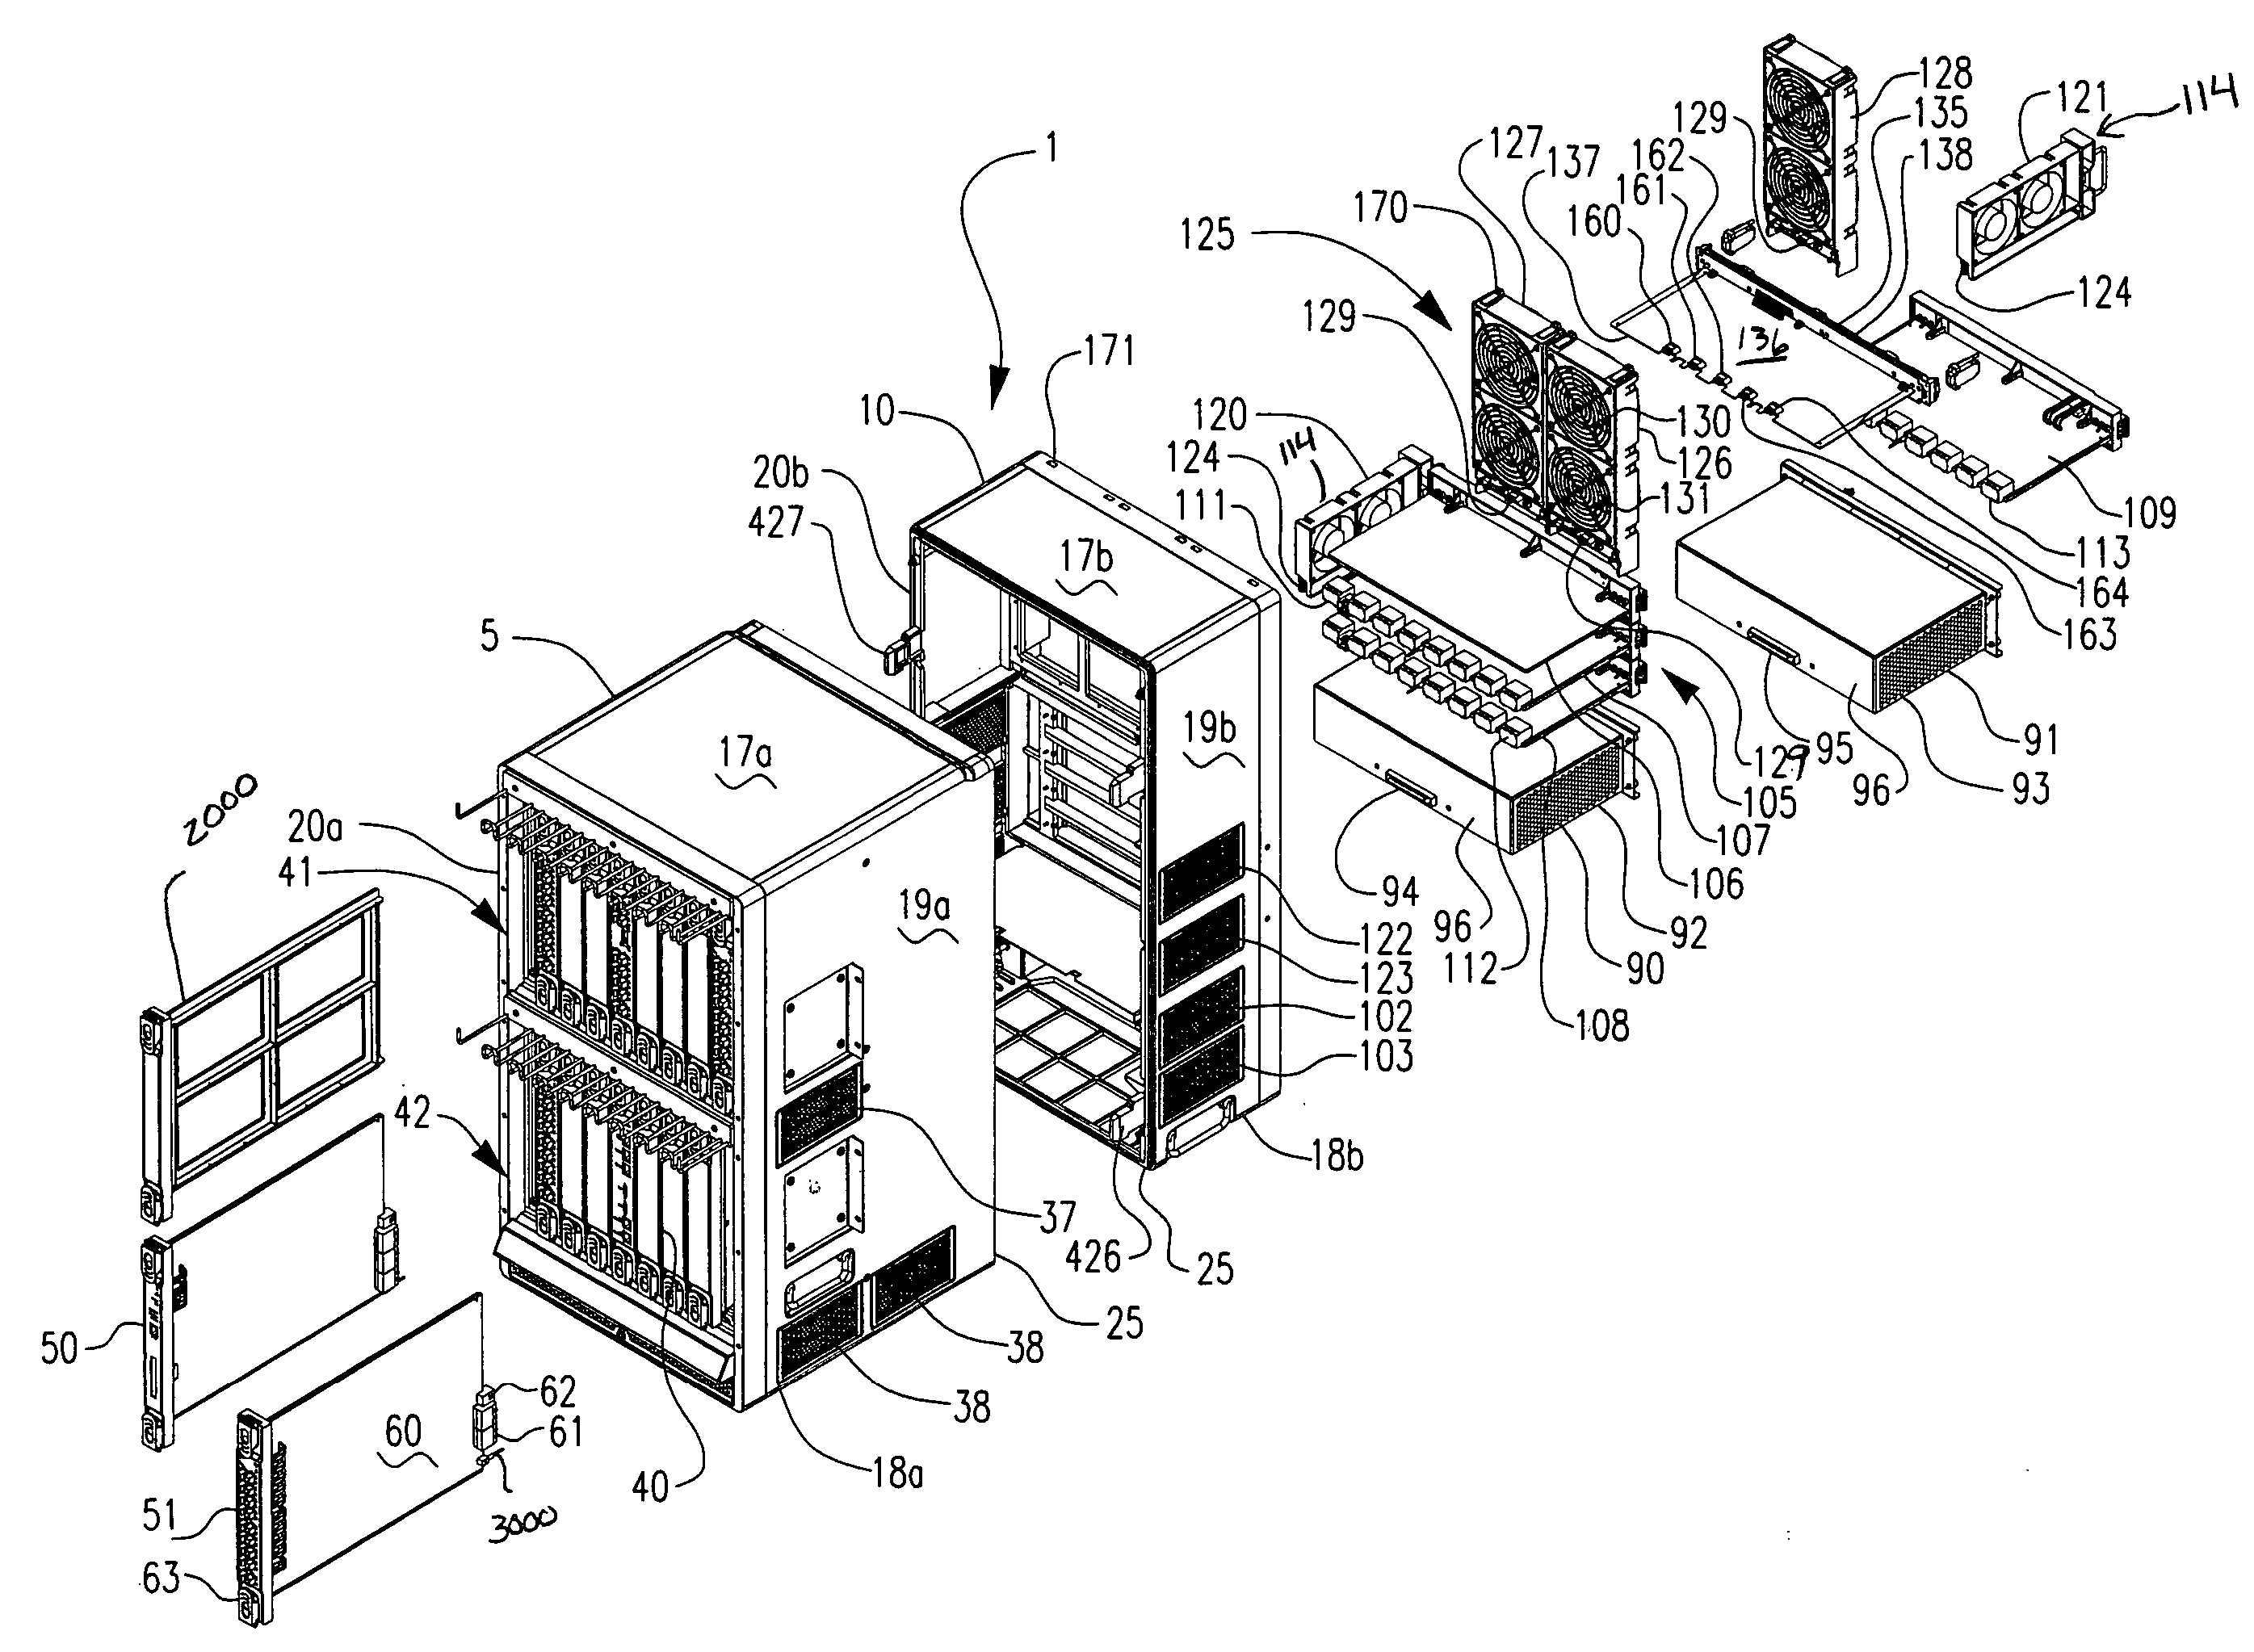 Modular chassis divided along a midplane and cooling system therefor